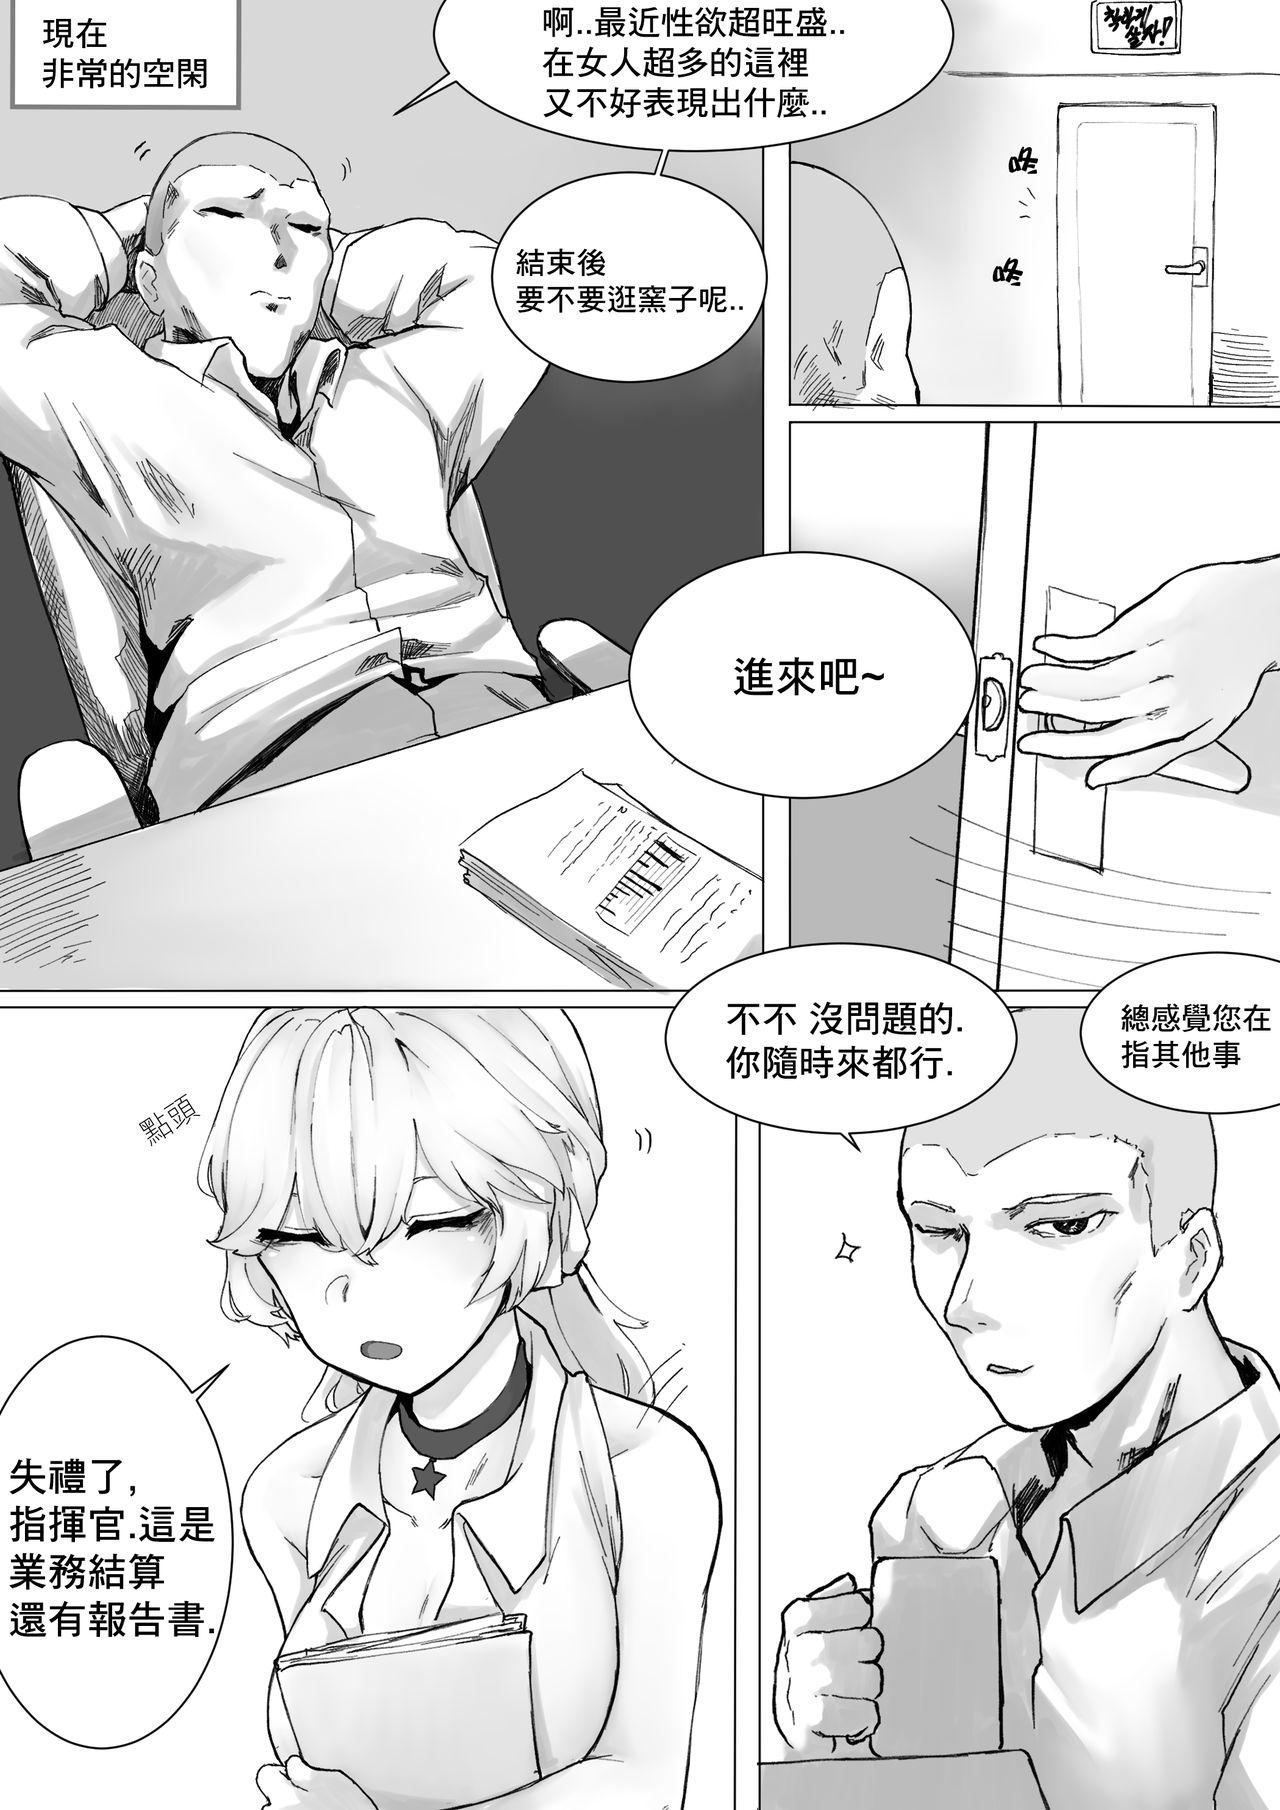 Taboo How To Use OTS-14 - Girls frontline Couple Sex - Page 3